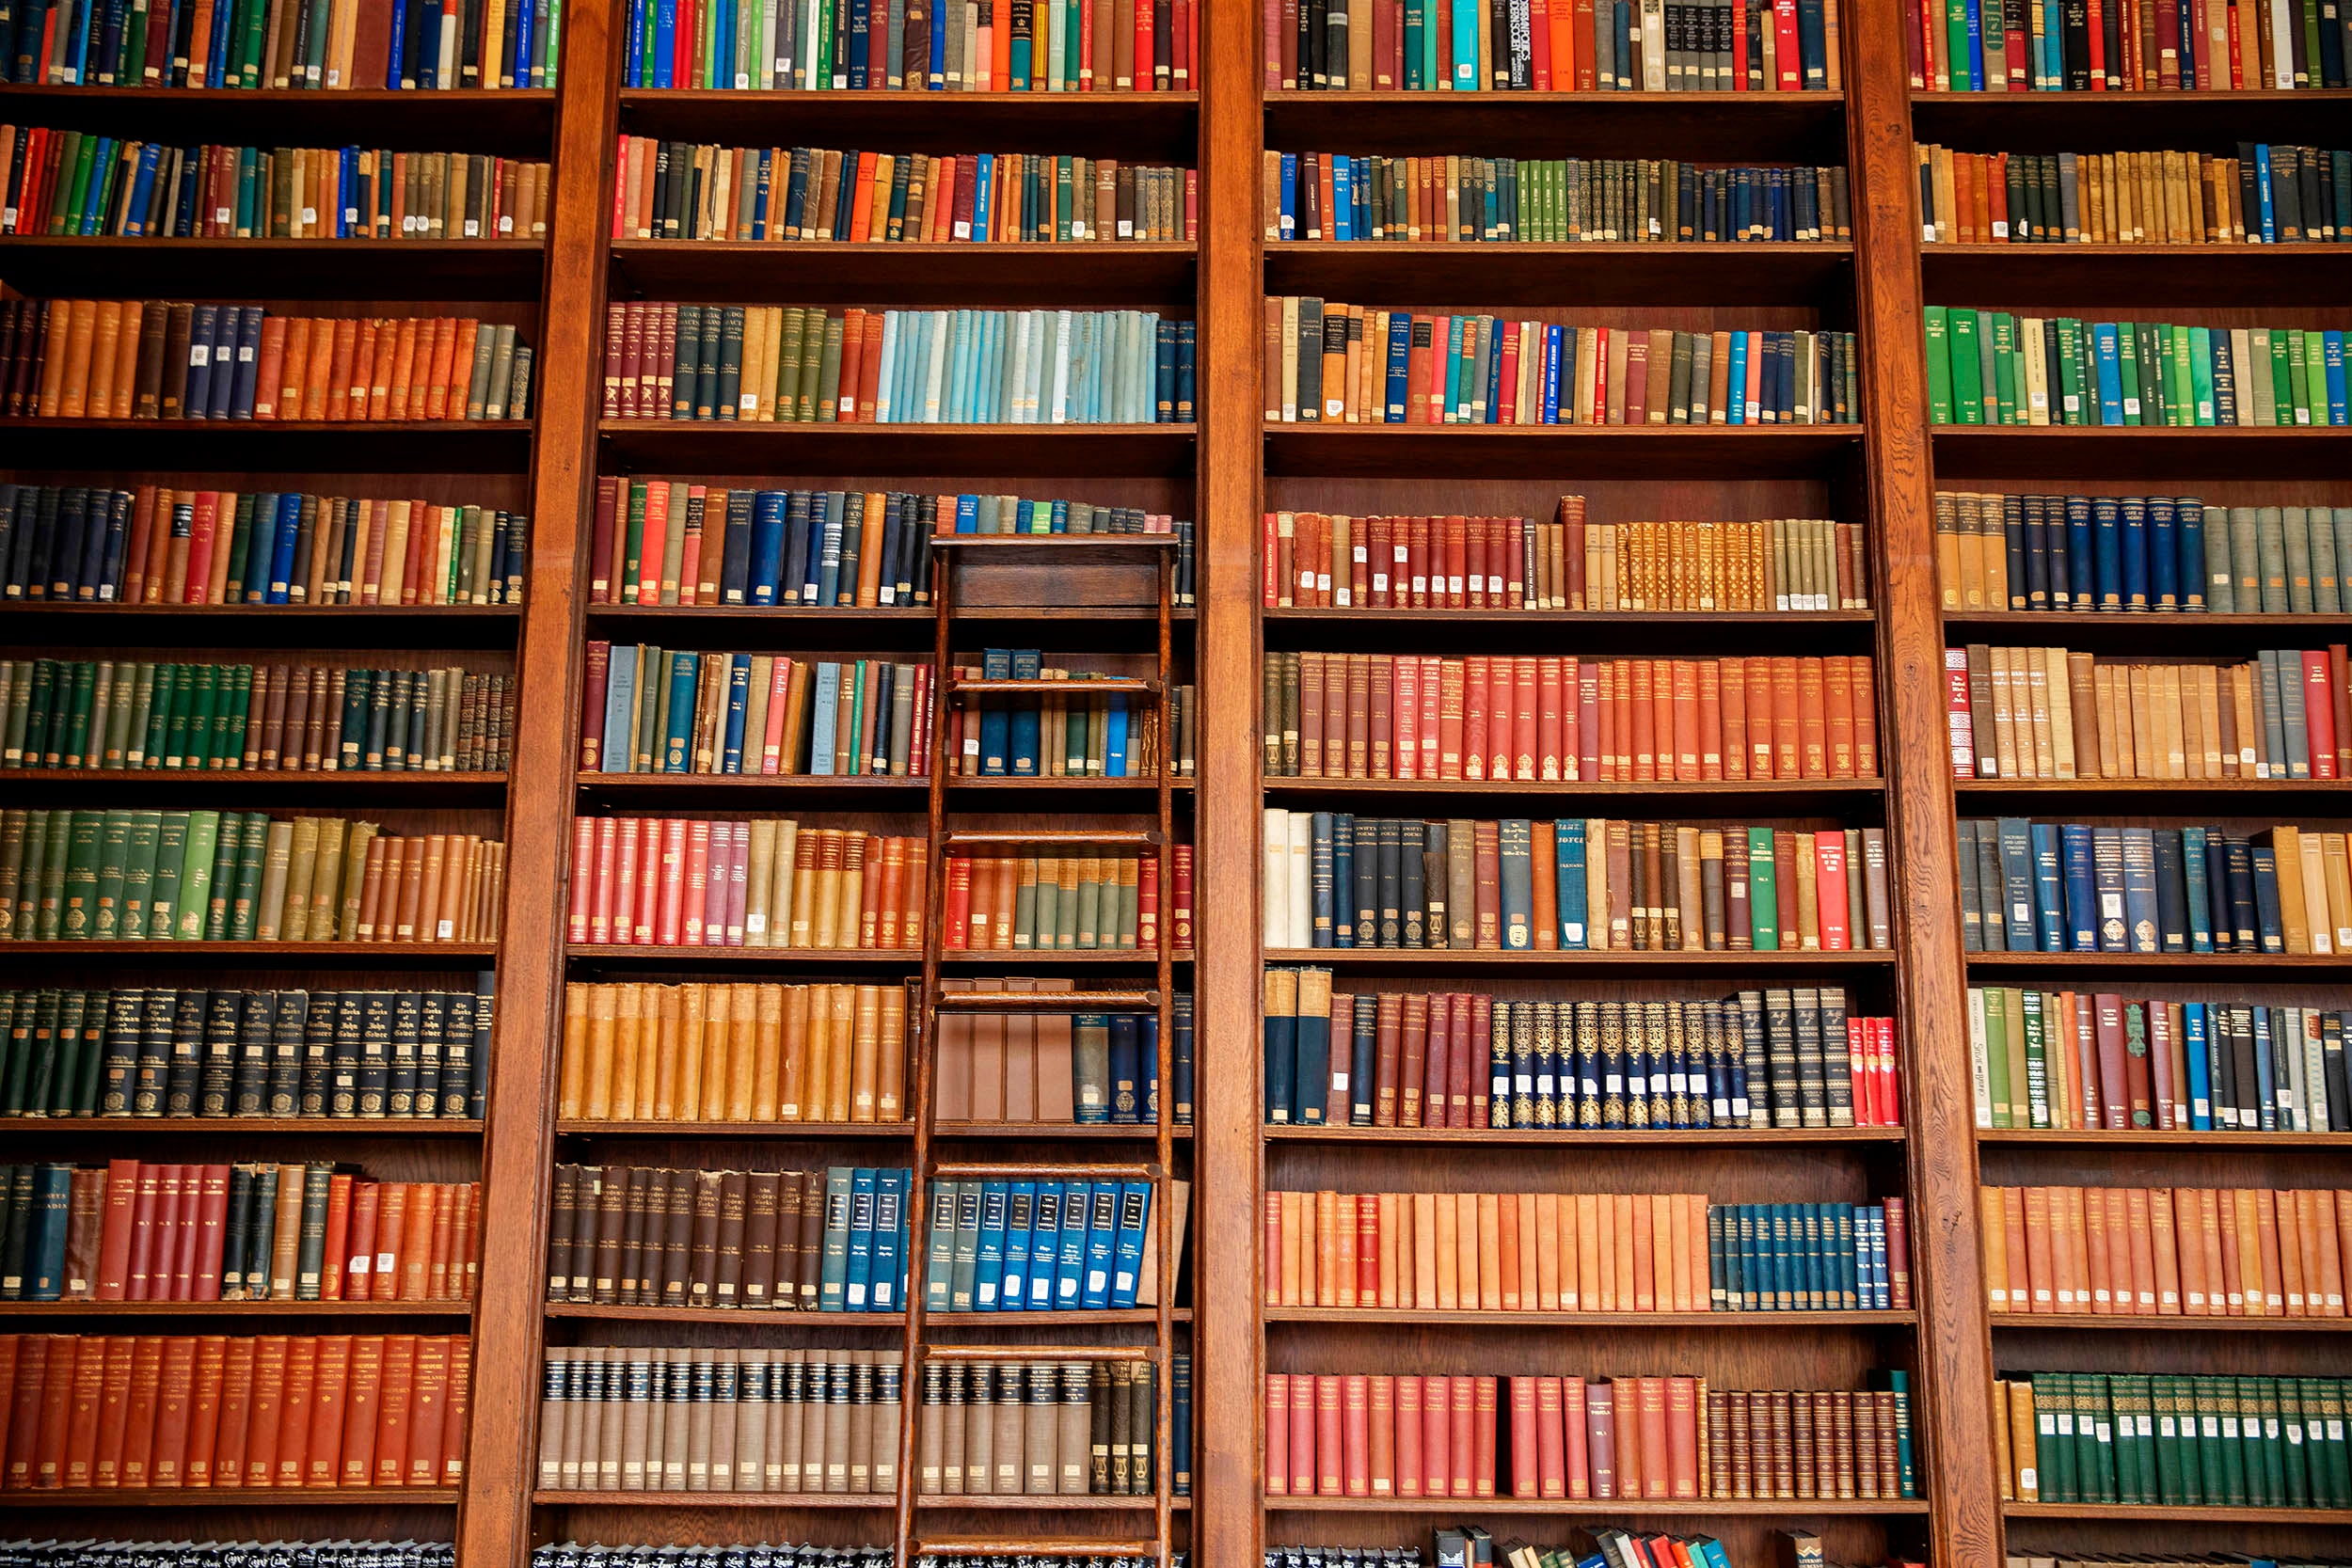 The Dunster House library features a rainbow of classics on its bookshelves.